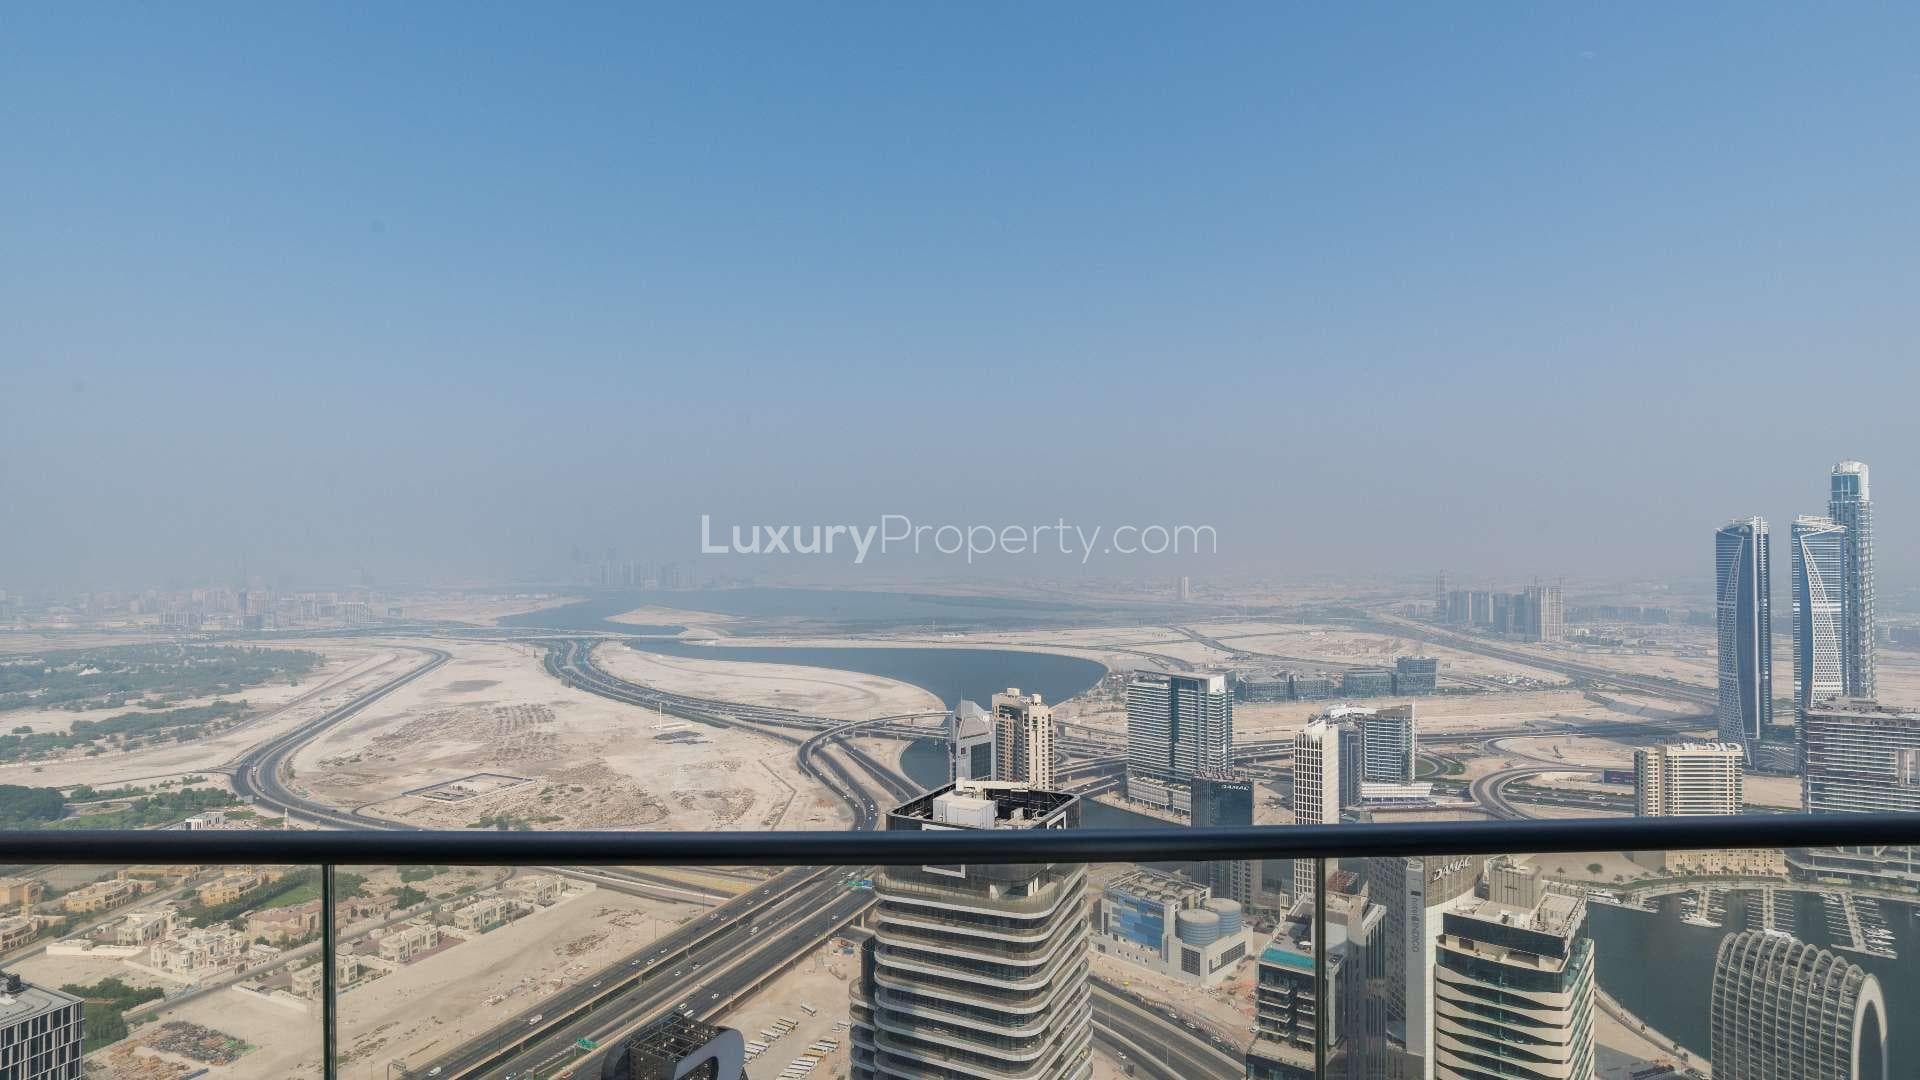 1 Bedroom Apartment For Sale The Address Residence Fountain Views Lp20135 26f24ac577d13a00.jpg